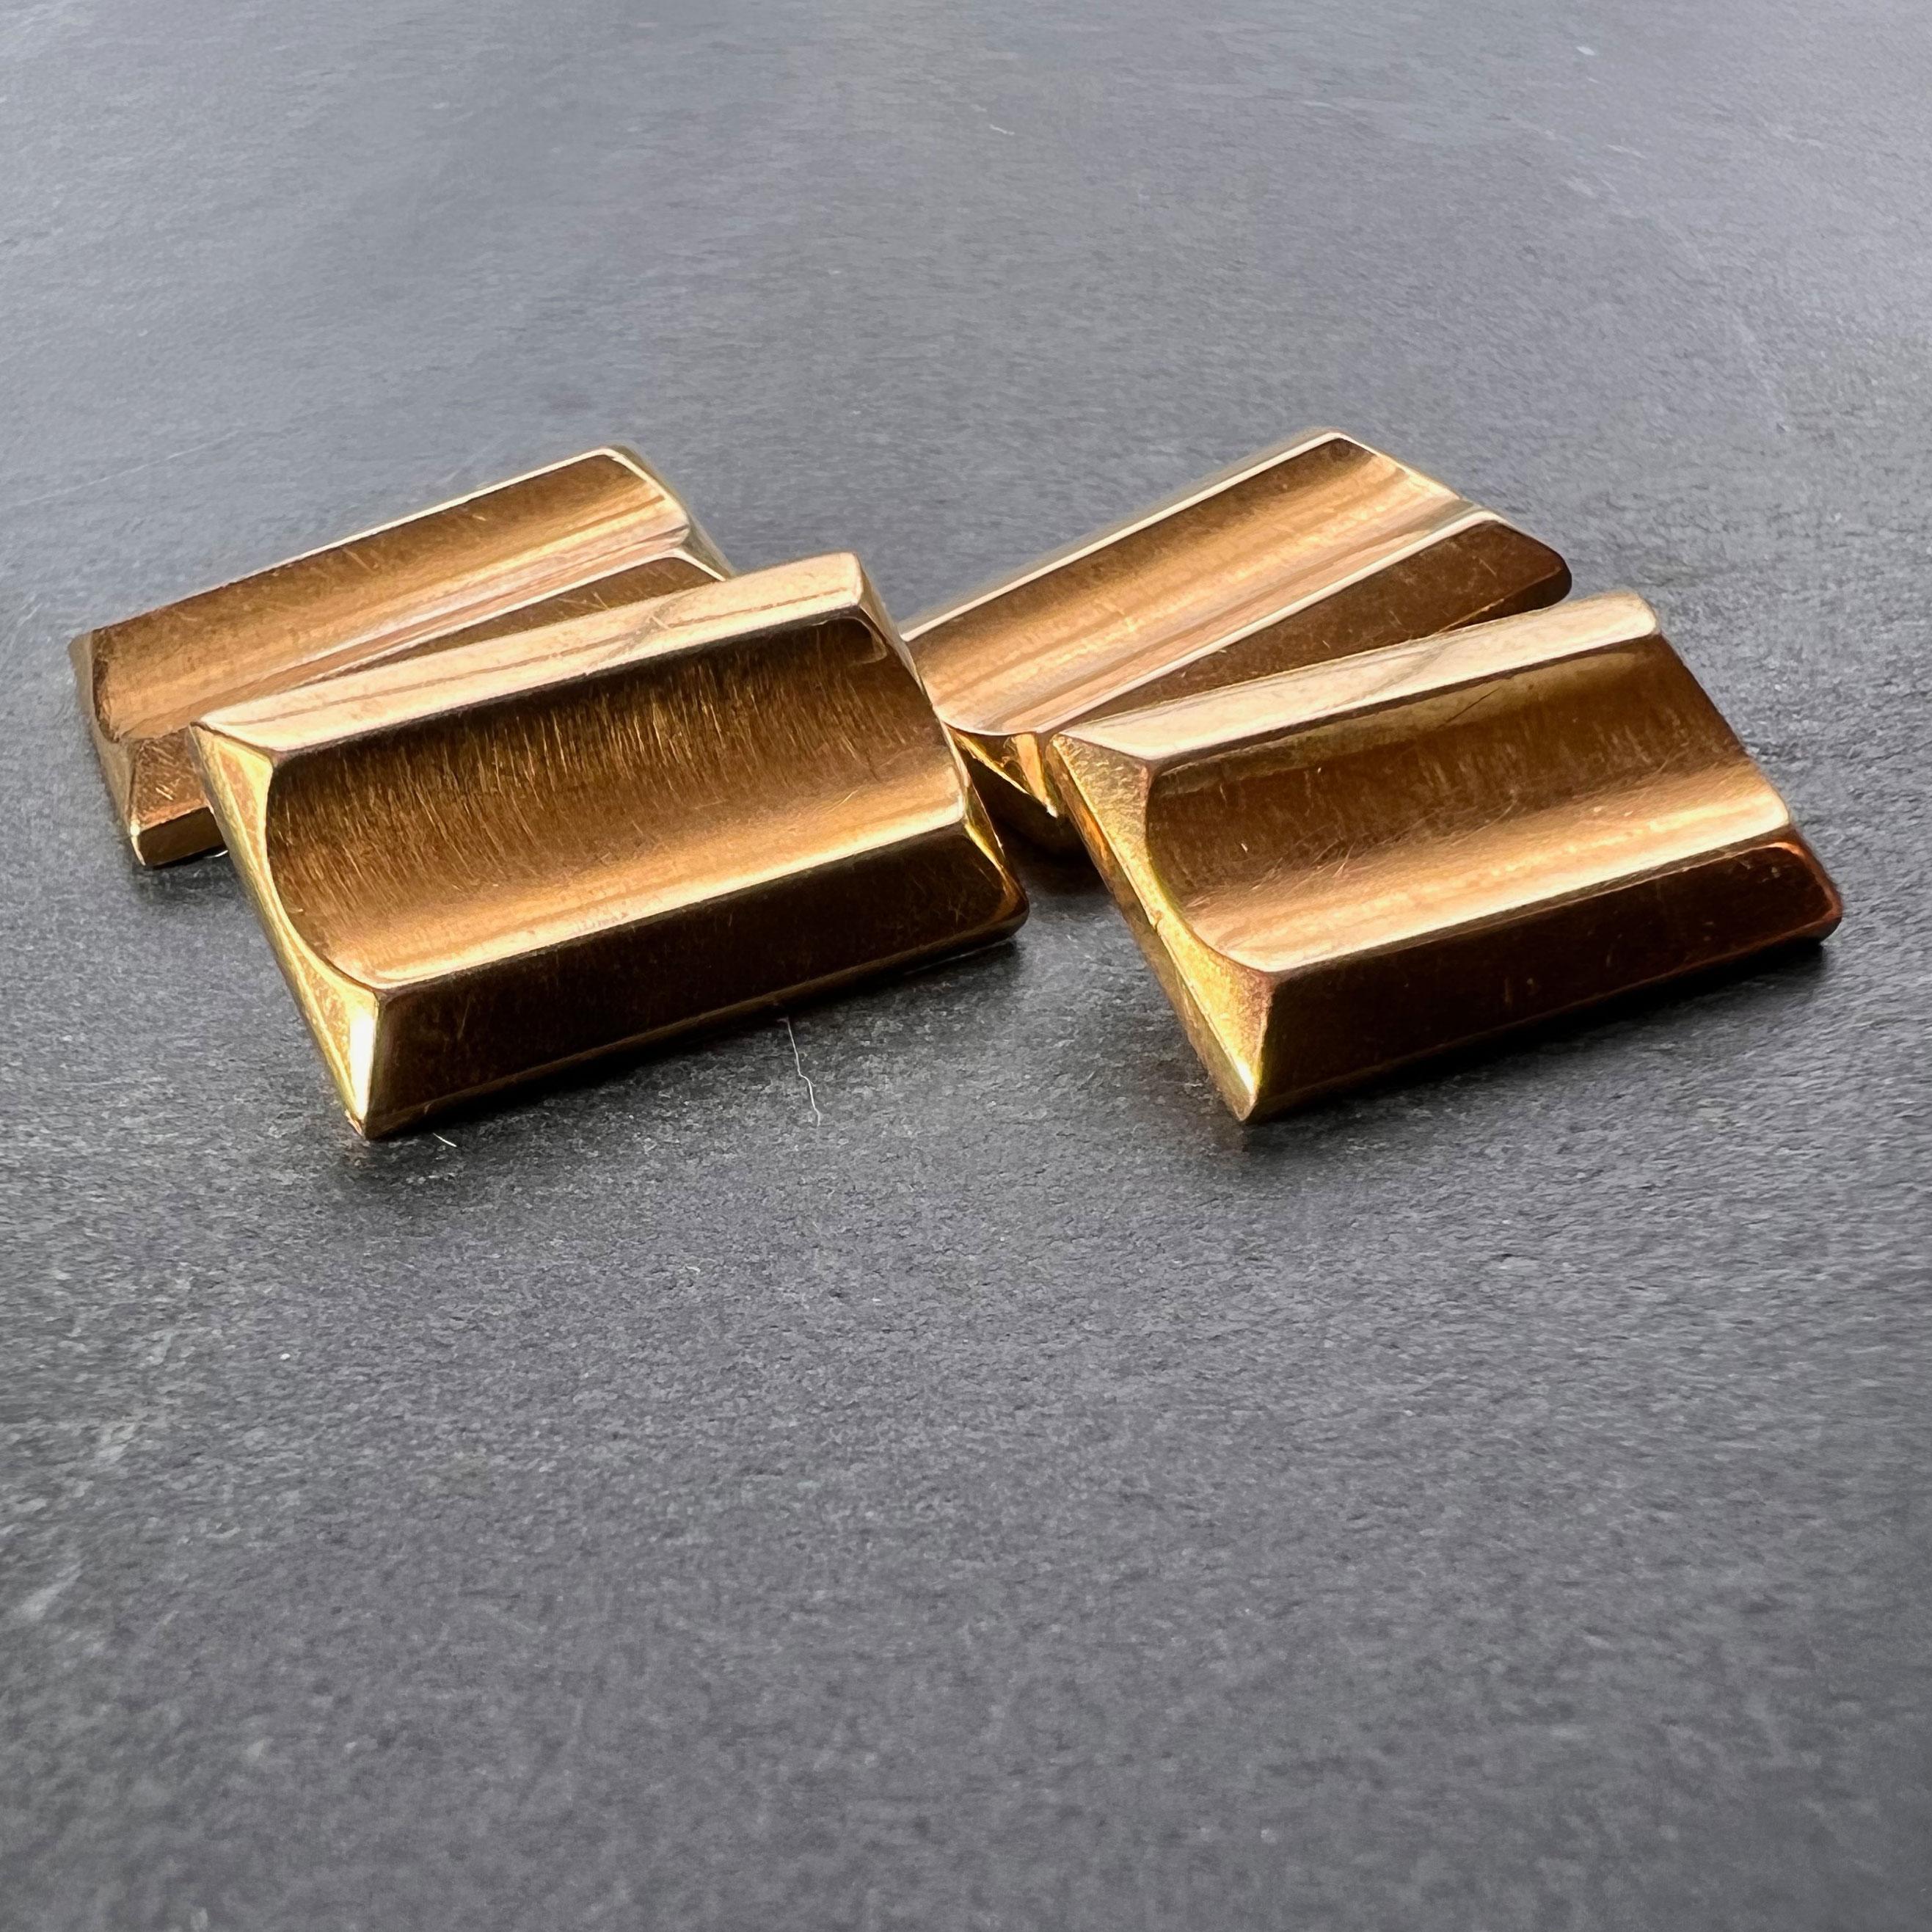 A pair of 18 karat (18K) yellow gold cufflinks, each designed as a rectangle with geometric raised edges in the Retro ‘Tank’ style. Stamped with the eagle mark for 18 karat gold and French manufacture and an unknown maker’s mark.
 
Dimensions: 1.5 x